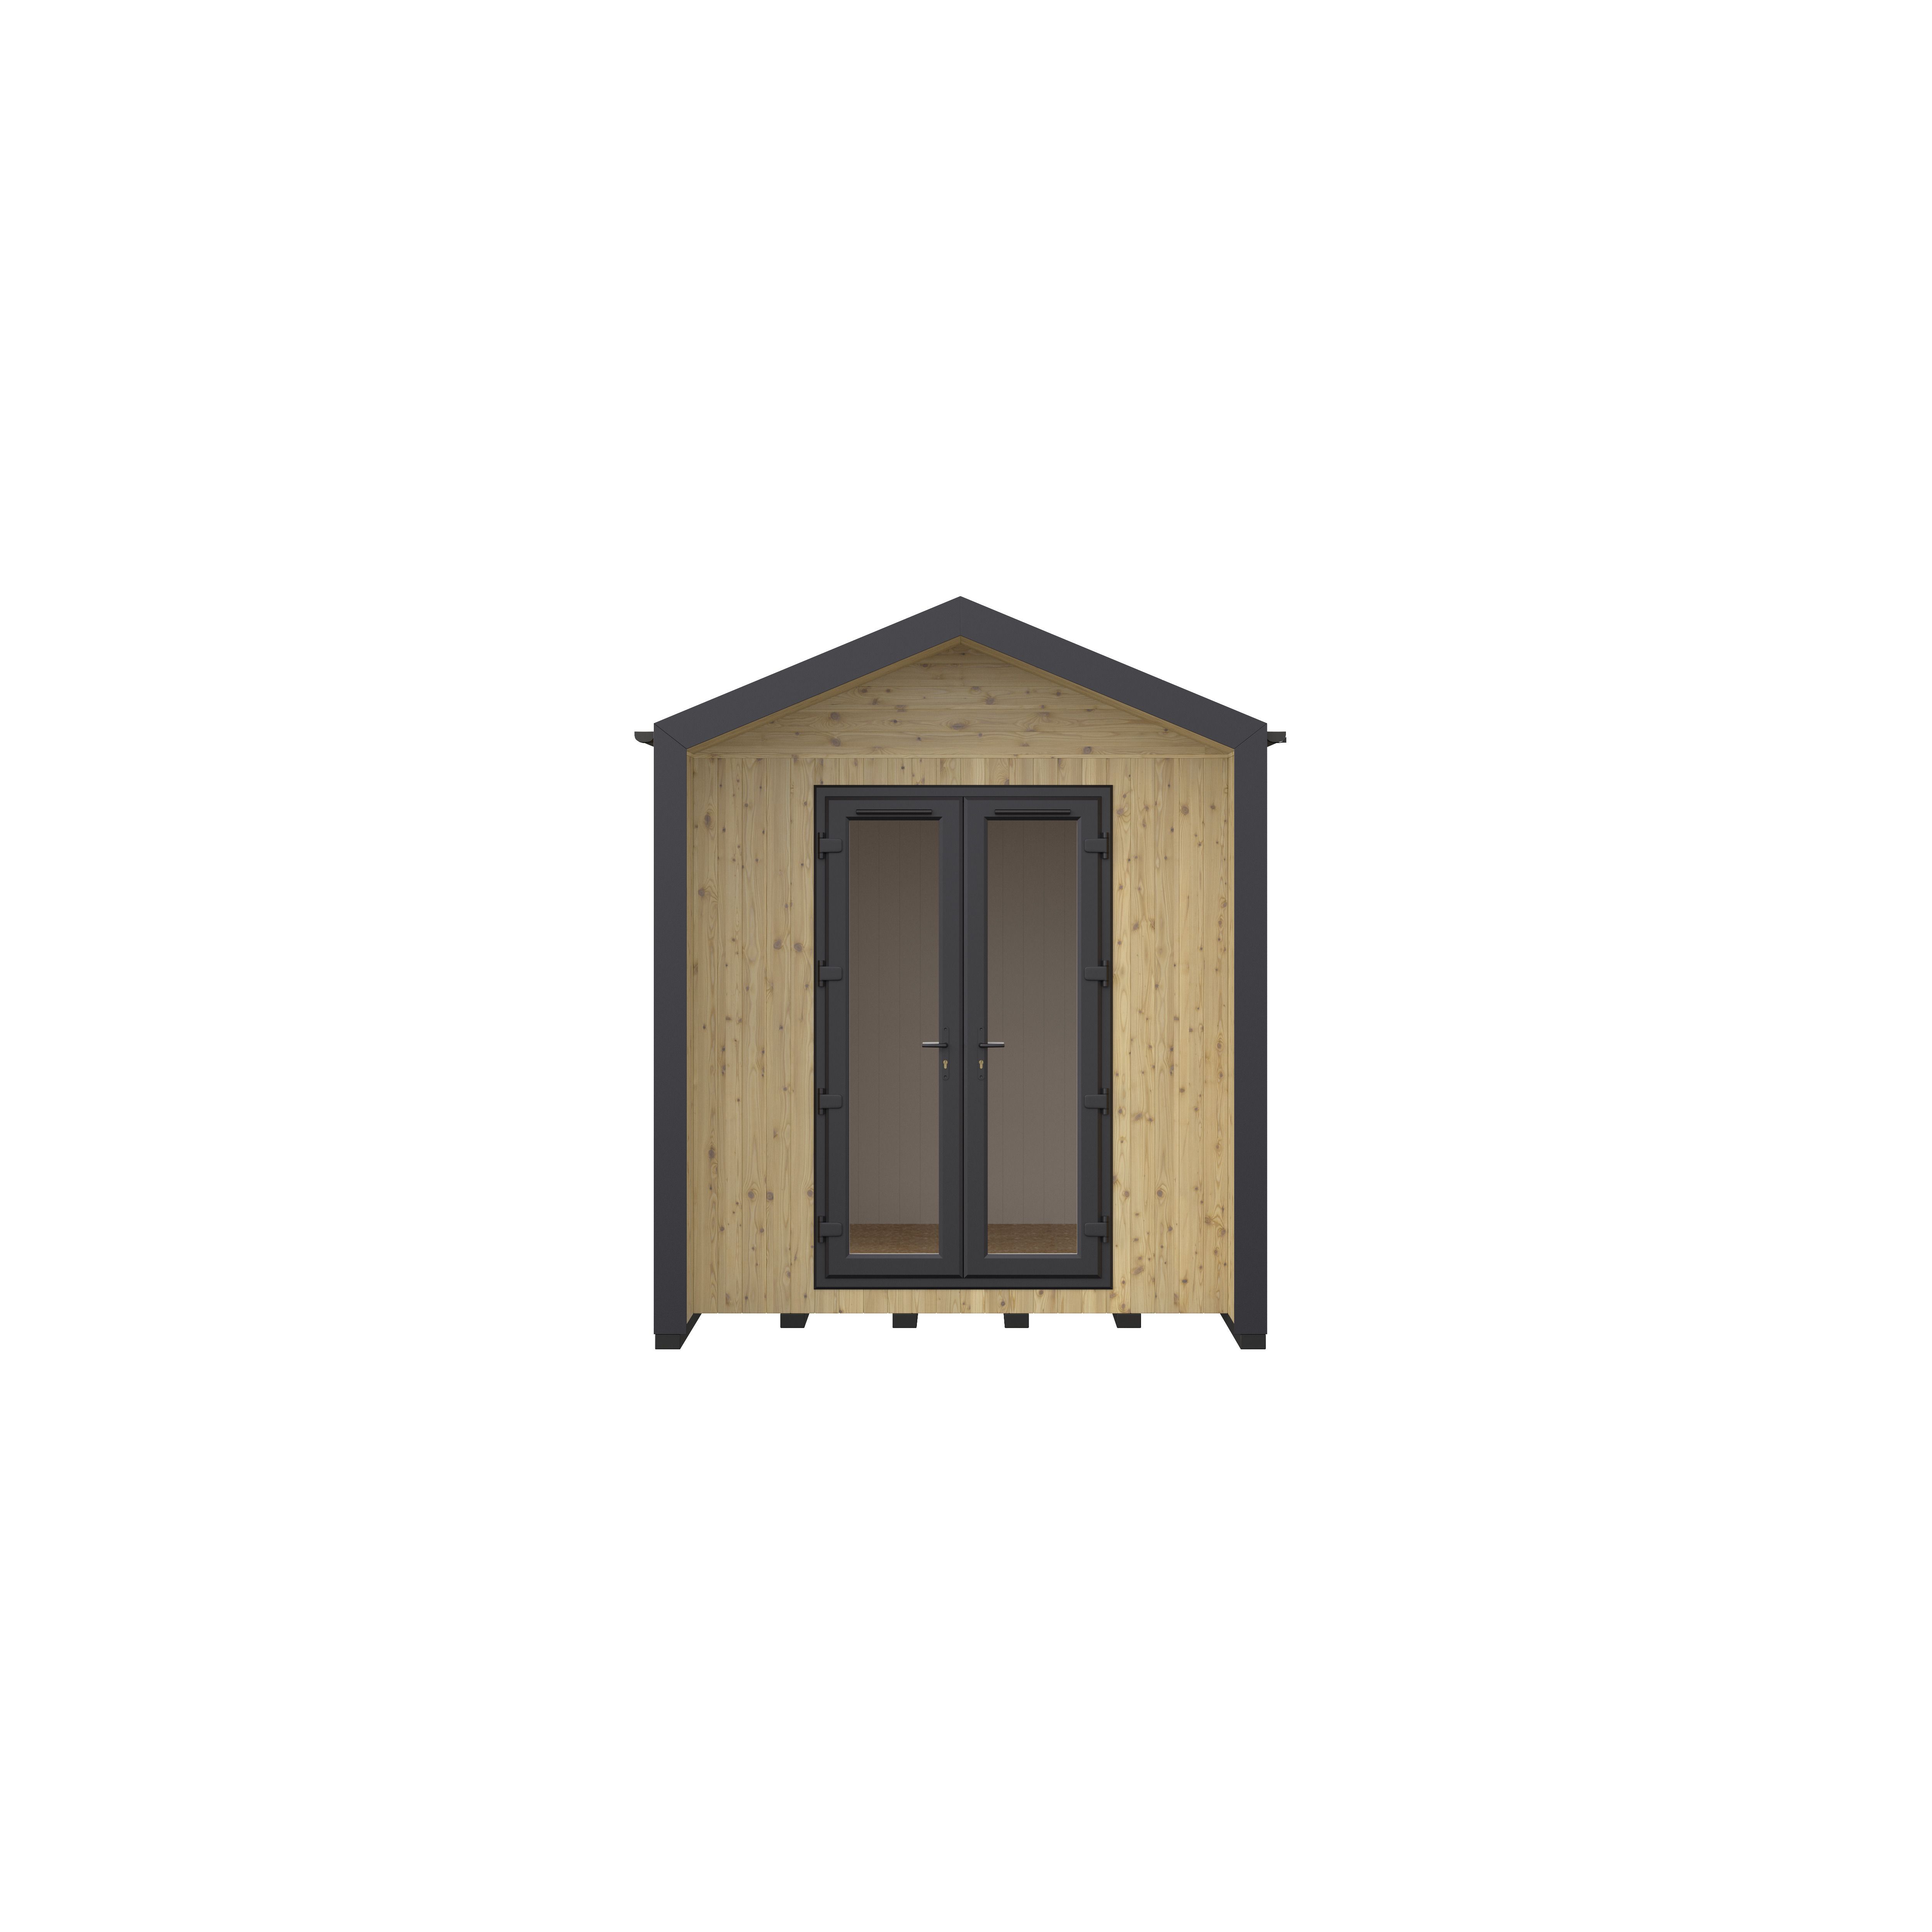 GoodHome Semora 11x8 ft with Double door Pitch Garden room 2.4m x 3.2m (Base included) - Assembly service included